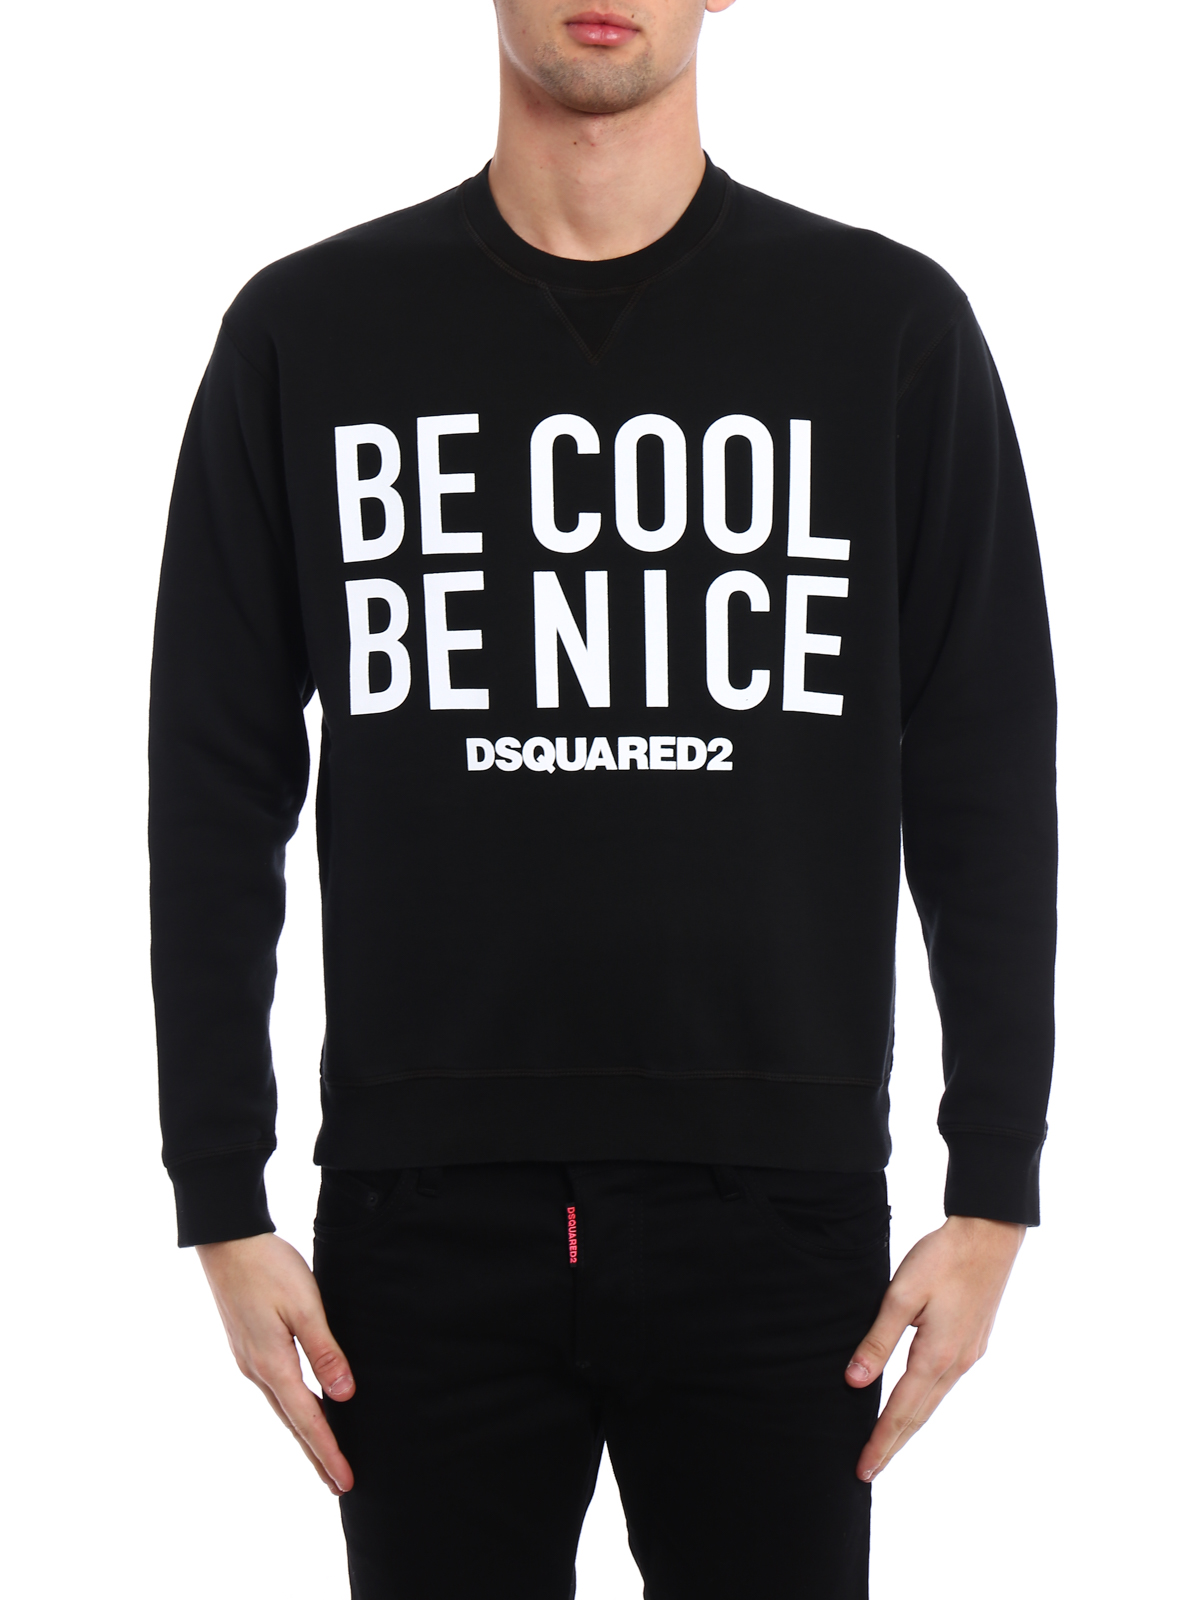 be cool be nice dsquared2 shirt